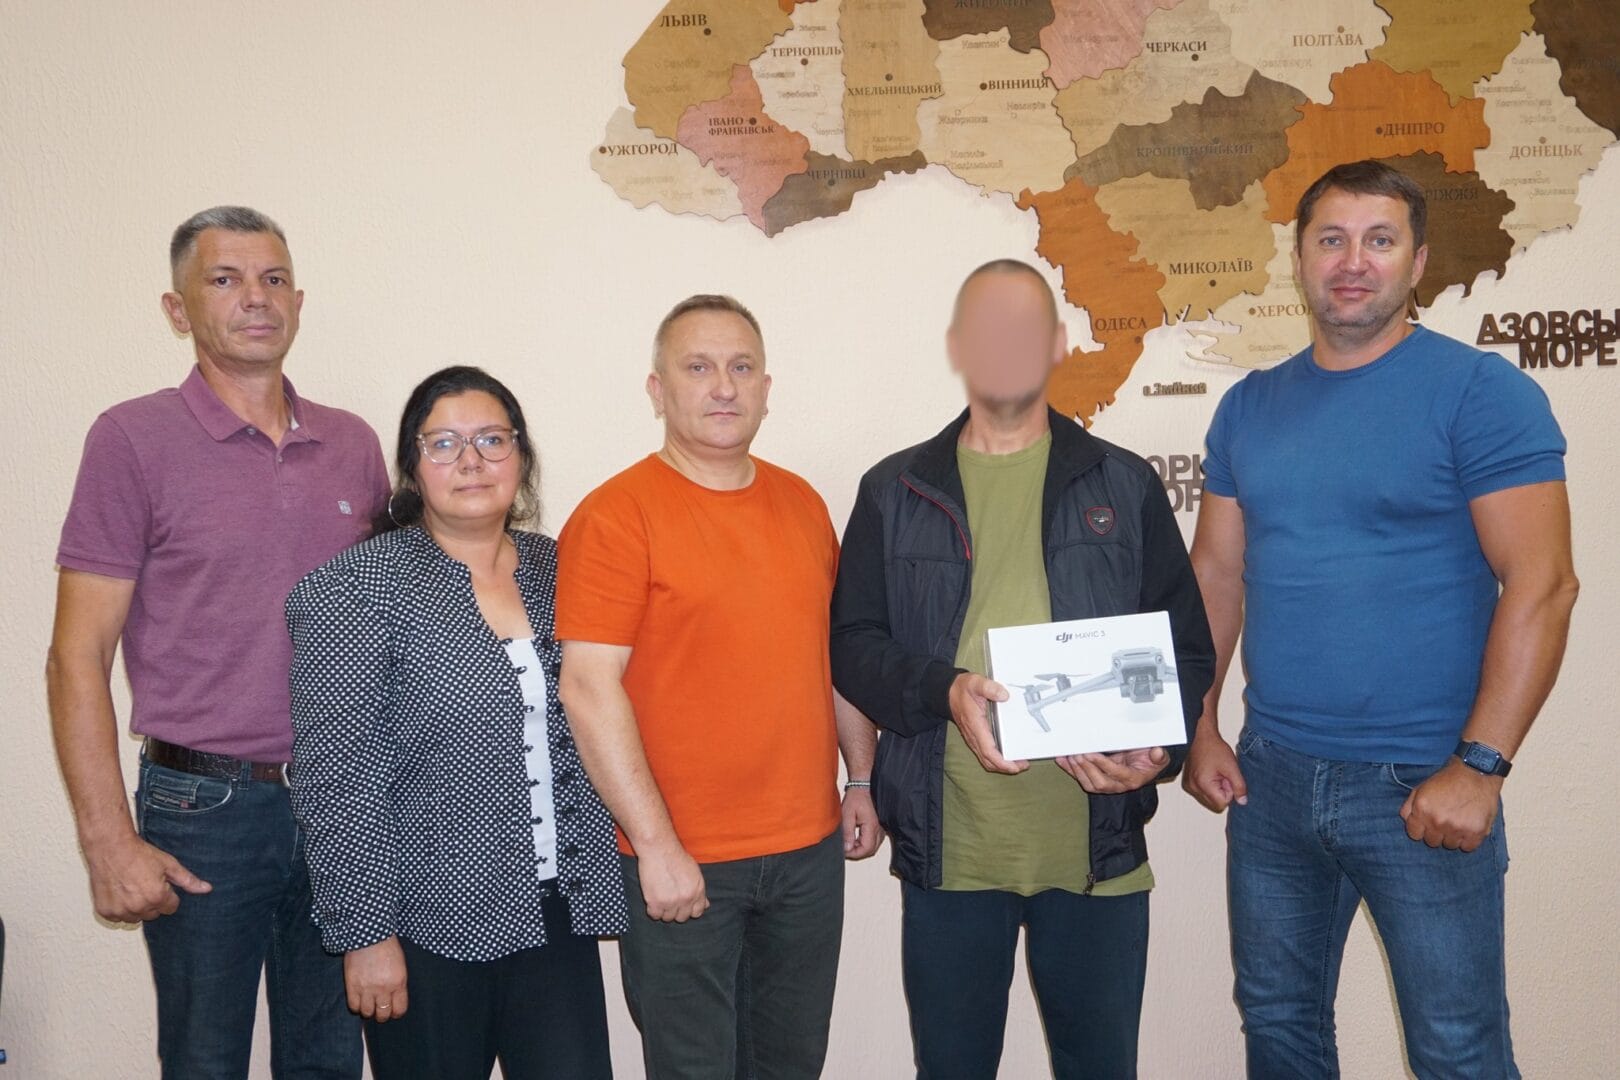 Employees of the town council purchased the necessary equipment for the Armed Forces and handed it over to the military